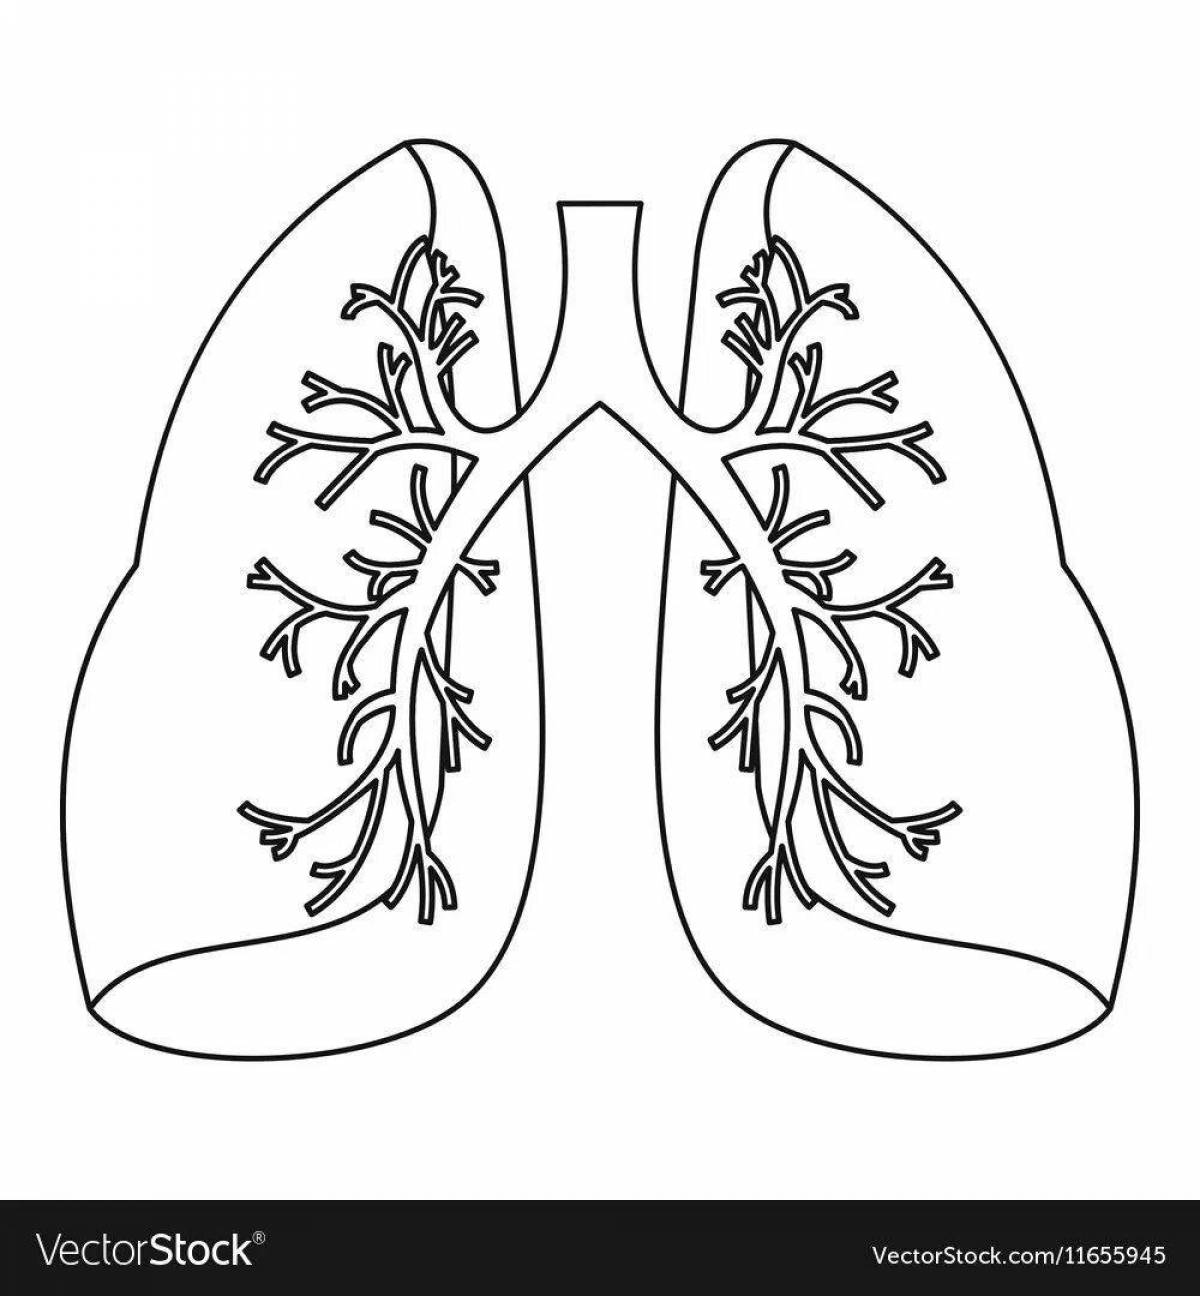 Interesting human lung coloring for kids